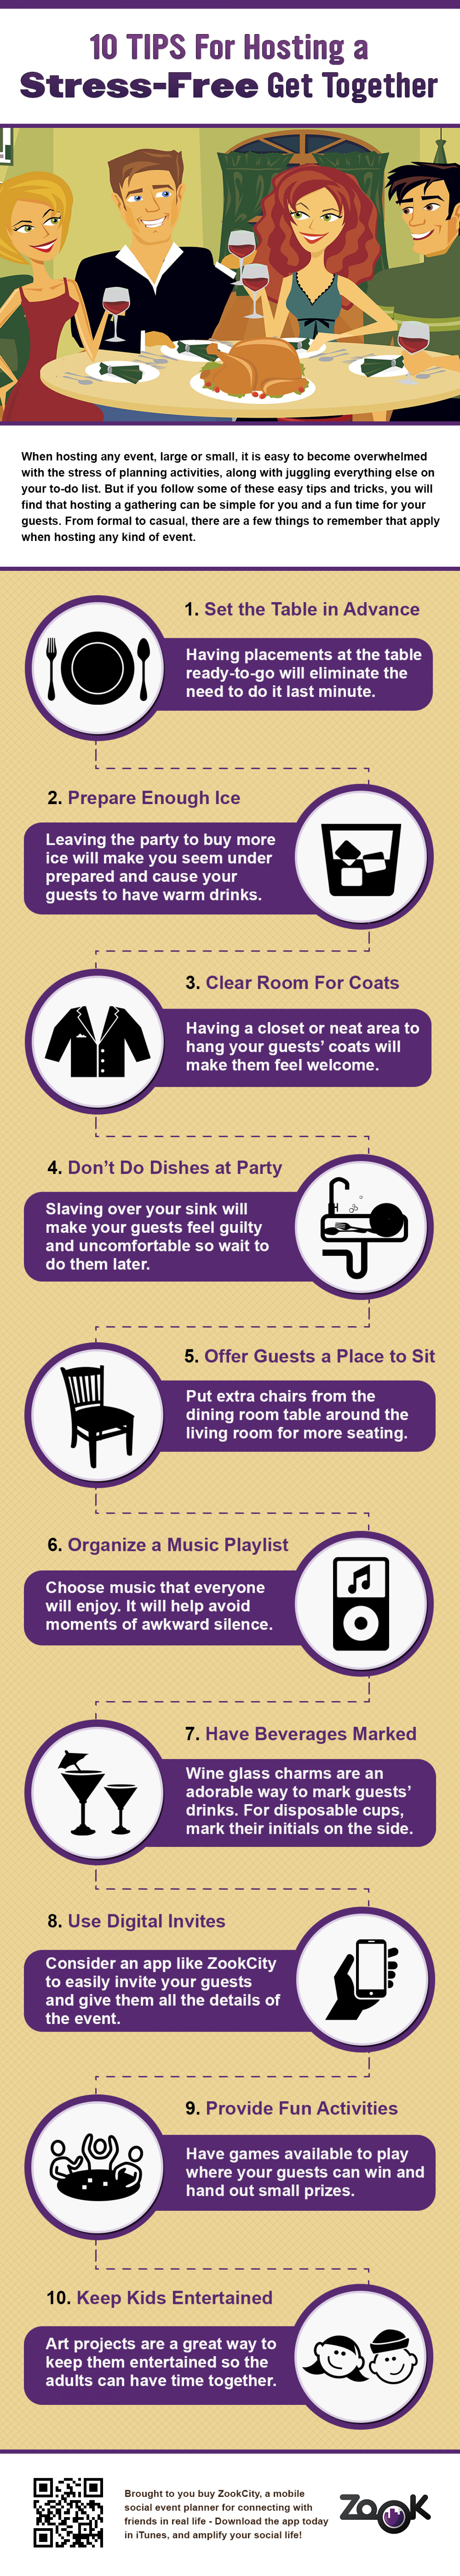 10 Tips For Hosting A Stress-Free Get Together Infographic